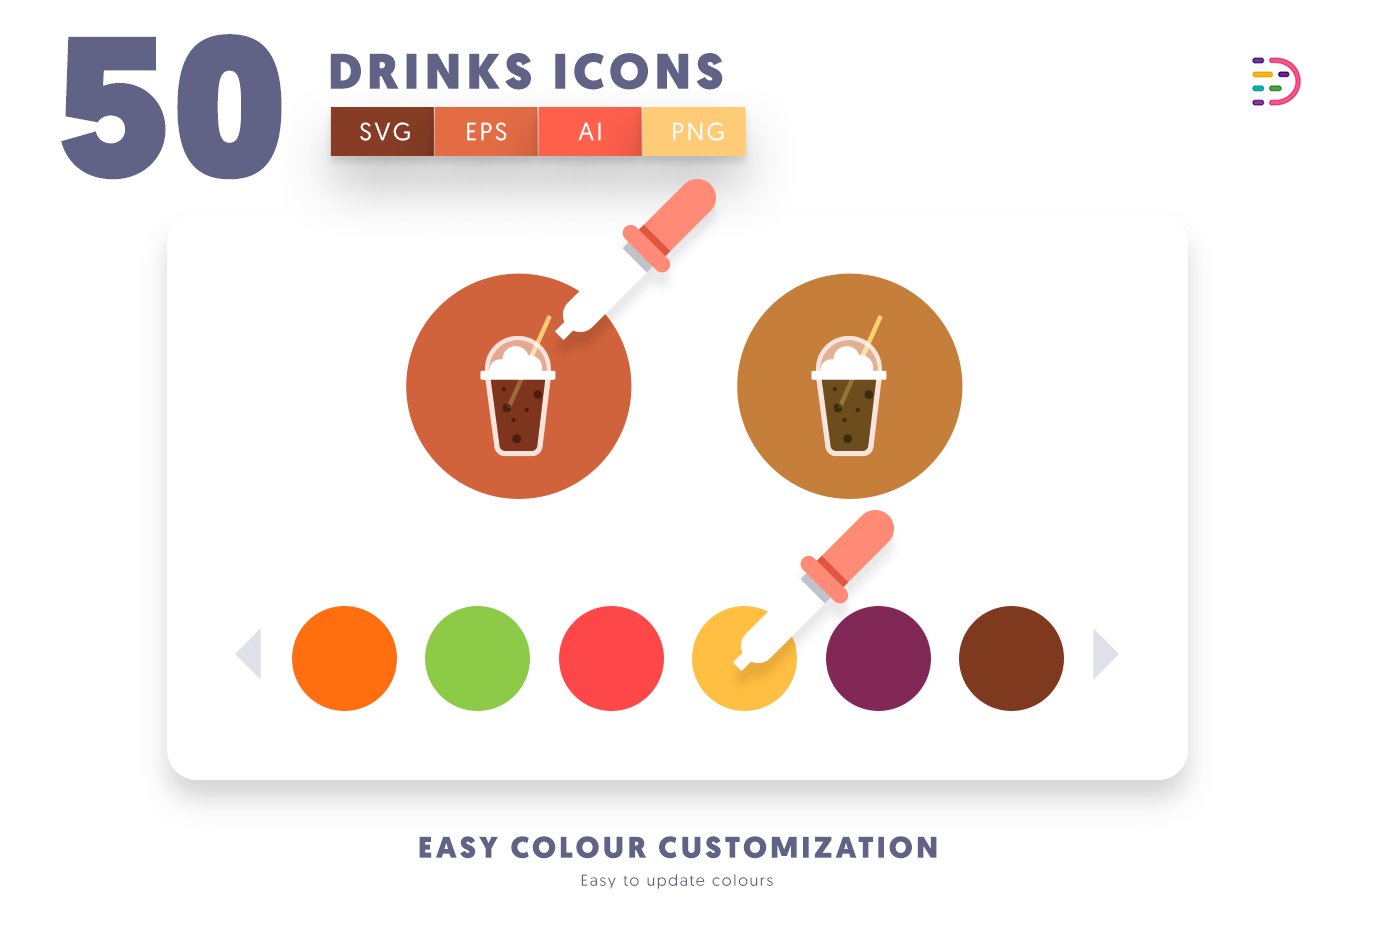 50 drinks icons cover 7 554